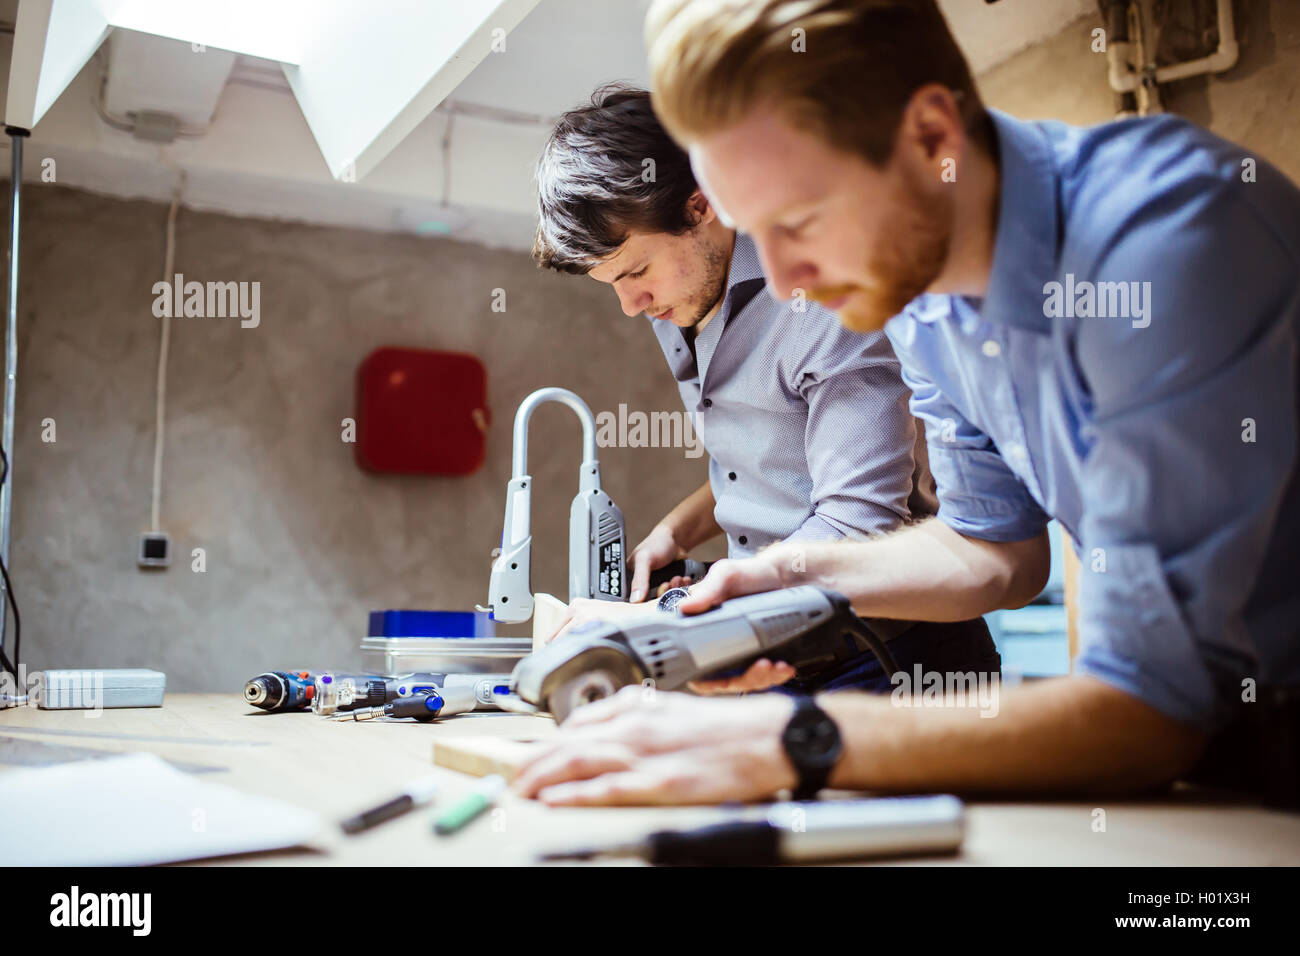 Two designers working on a project in workshop with joint effort Stock Photo